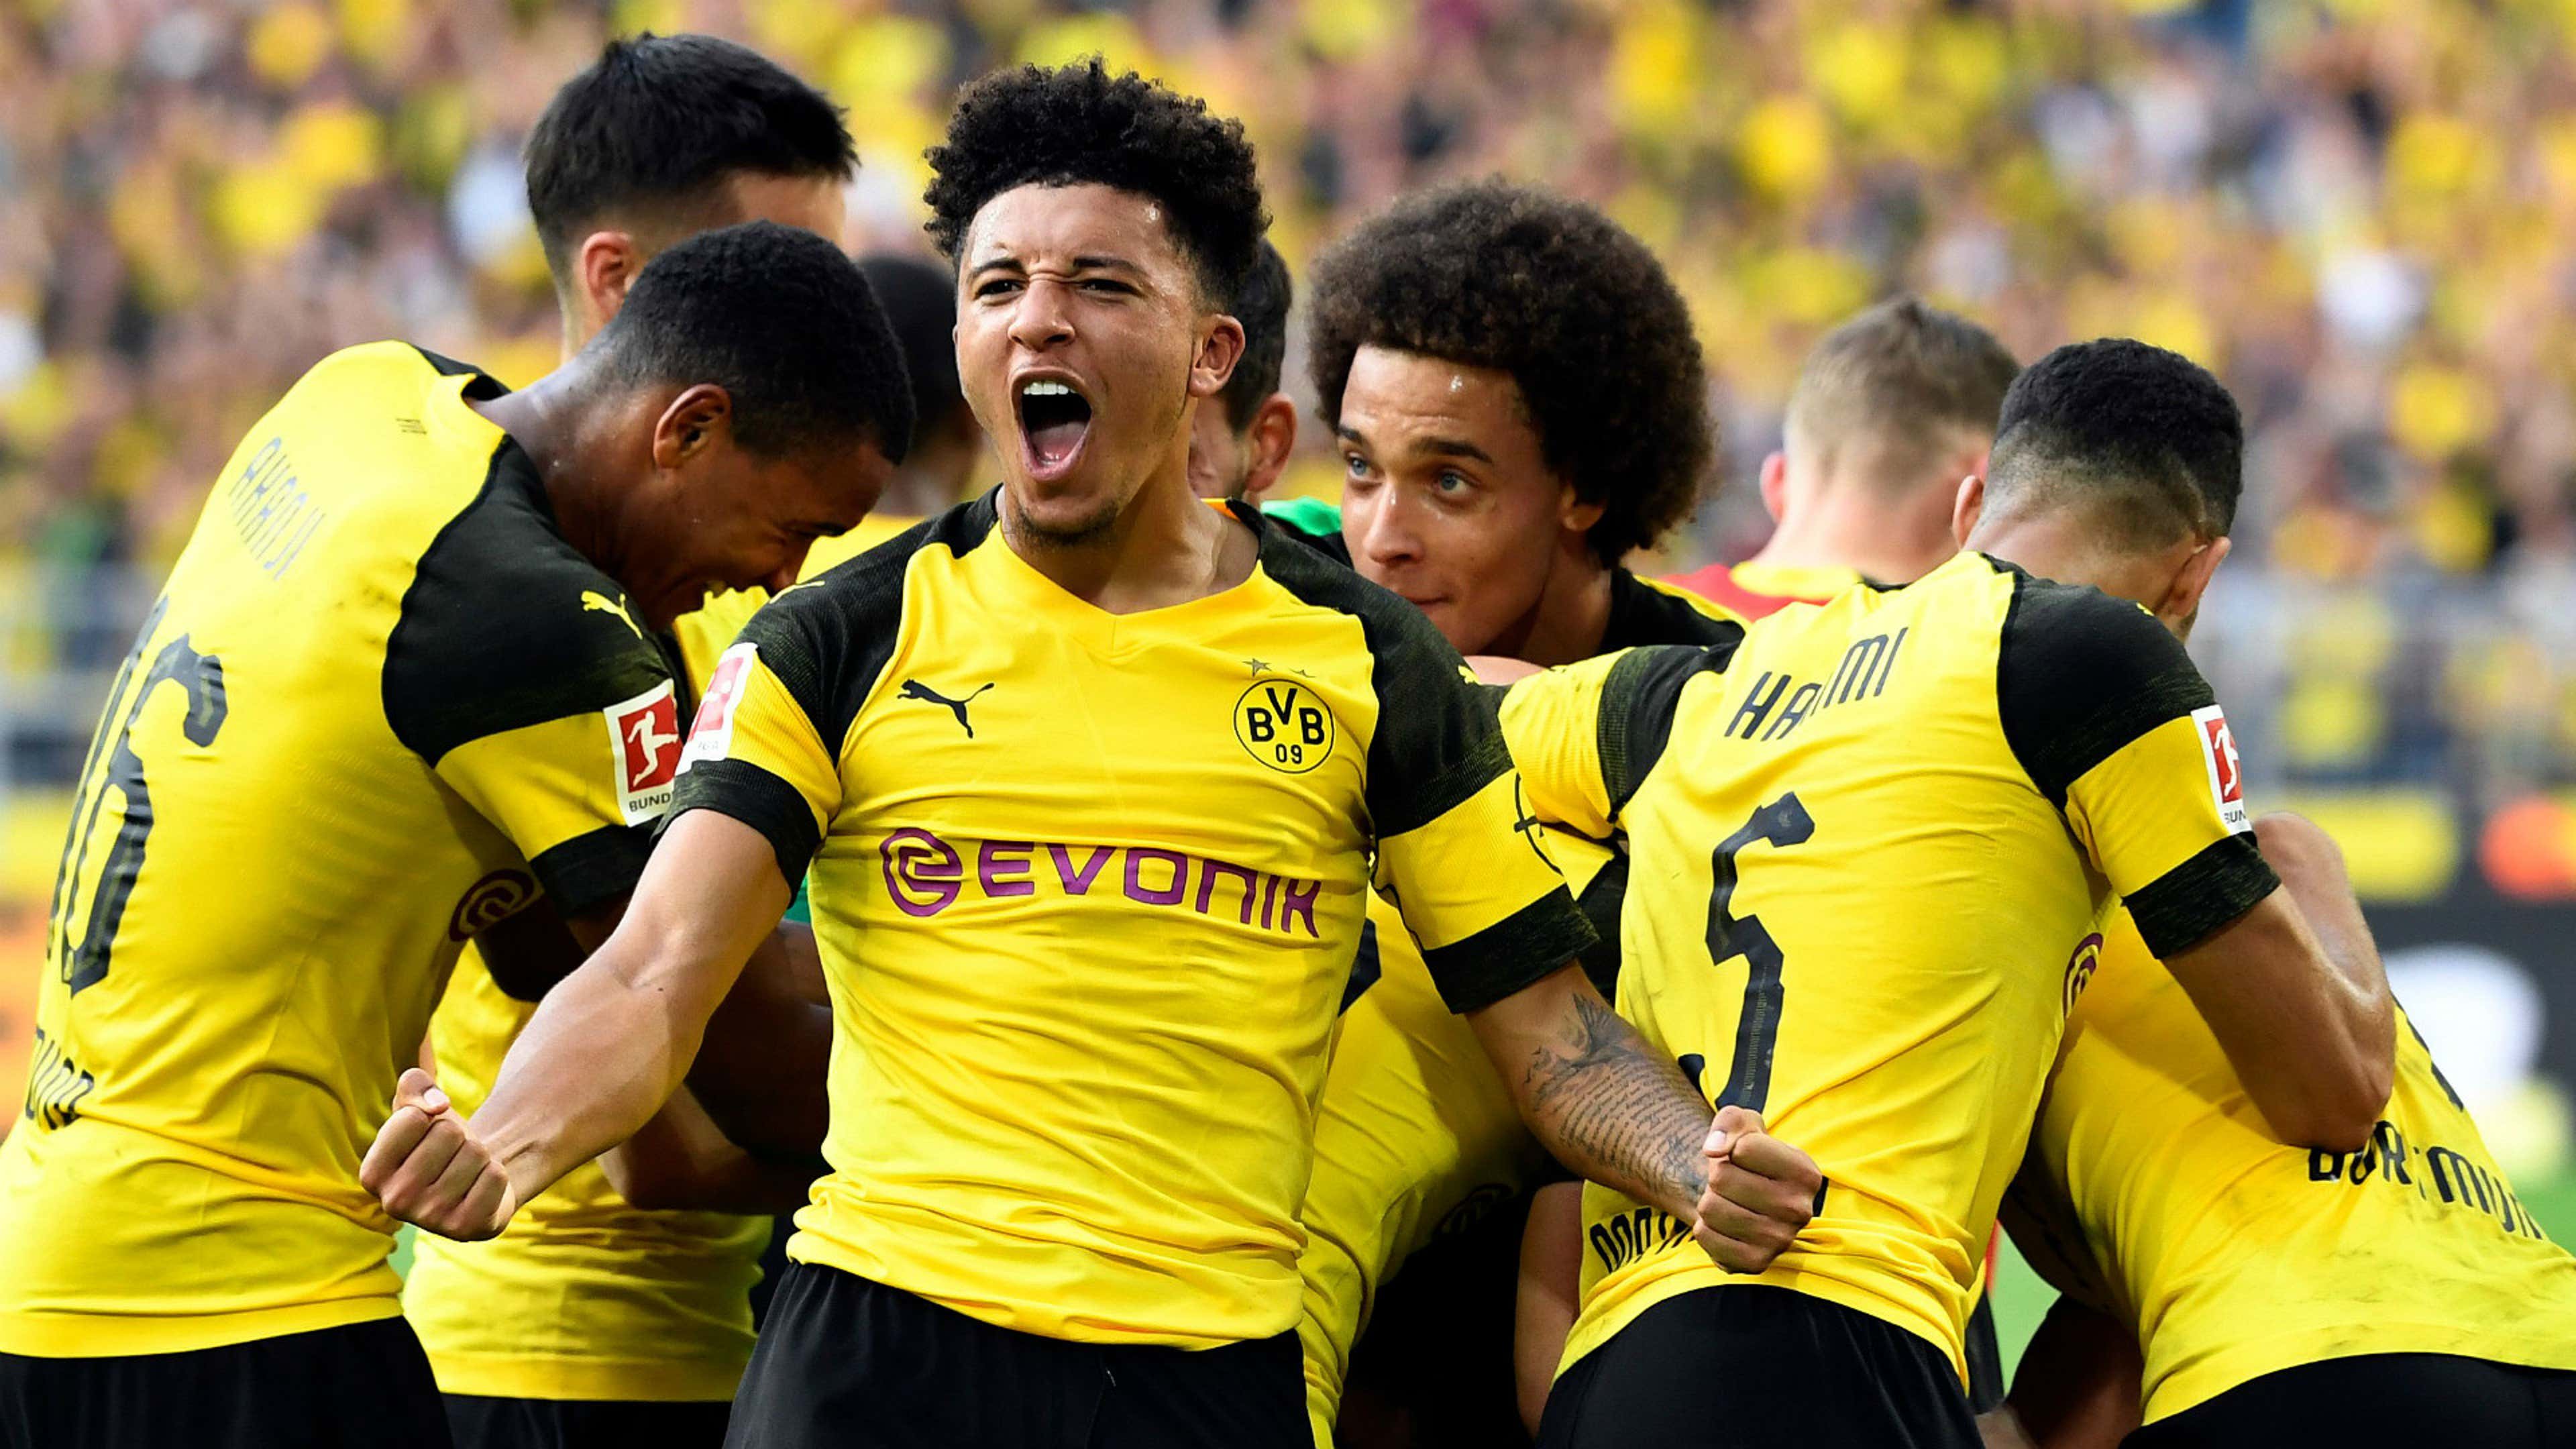 plafond Ijsbeer wapen Transfer news: Jadon Sancho says 'crazy' number of clubs wanted him but Borussia  Dortmund were always the best choice after leaving Man City | Goal.com UK